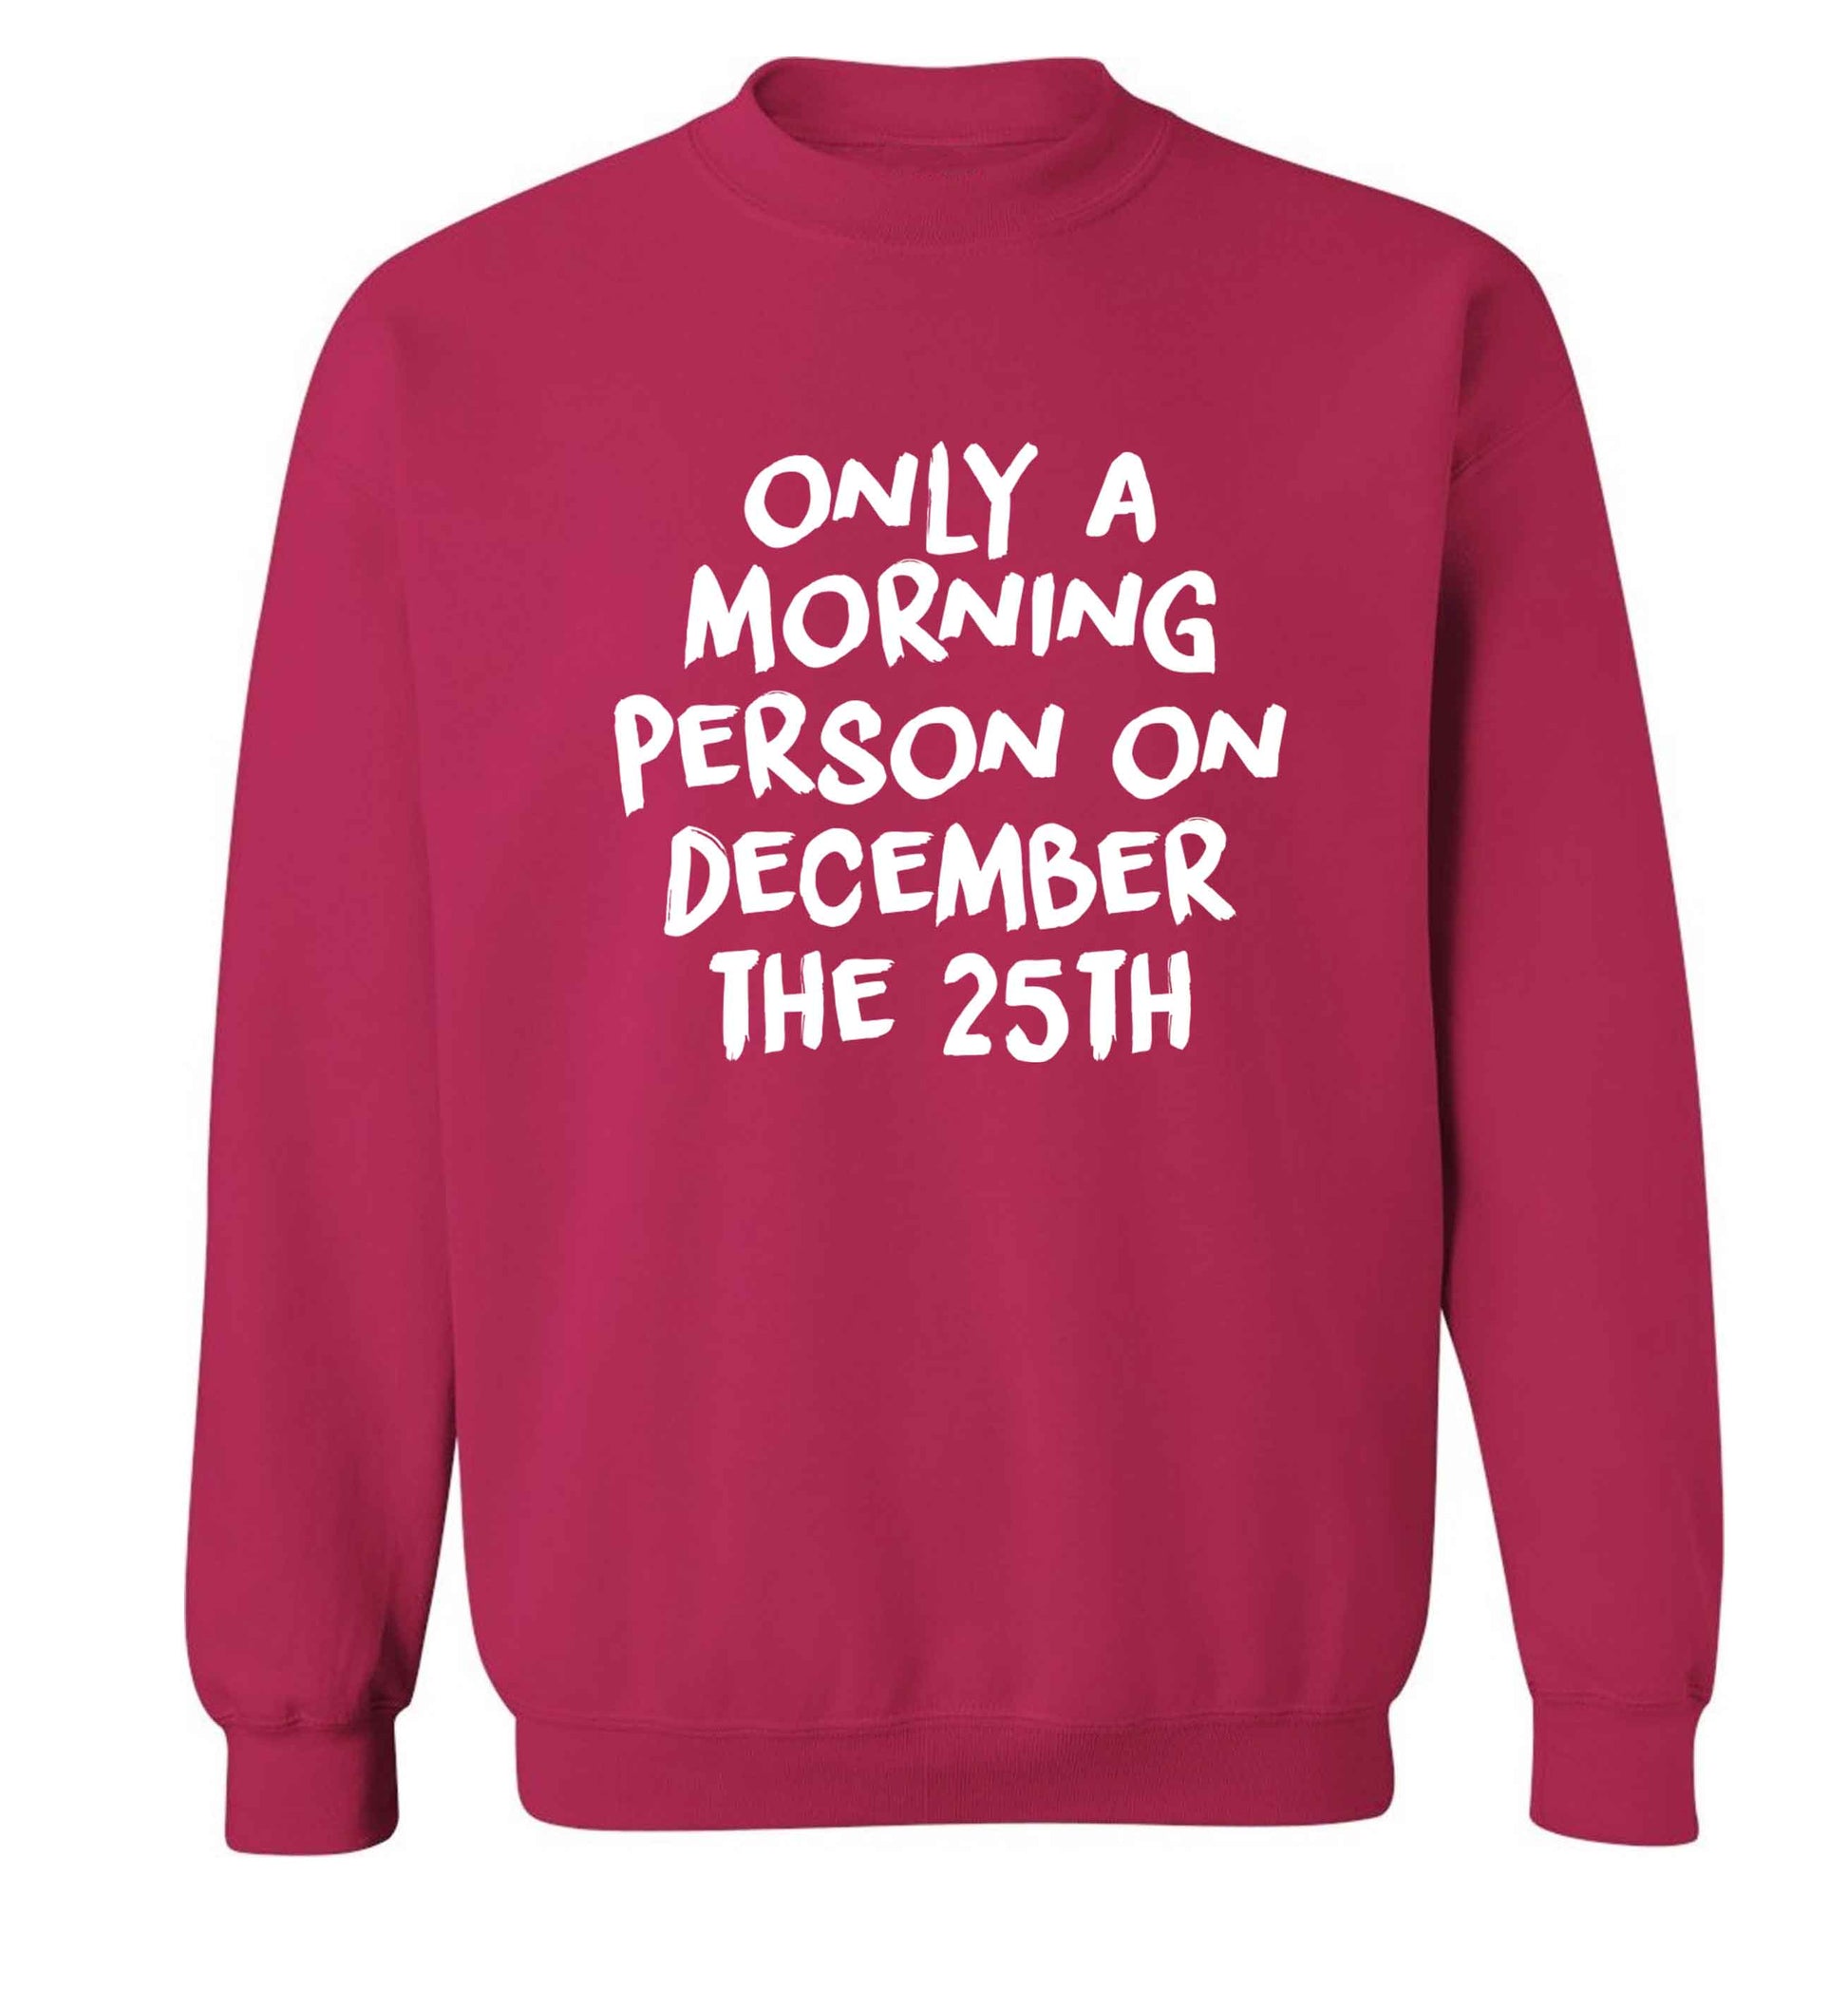 I'm only a morning person on December the 25th adult's unisex pink sweater 2XL